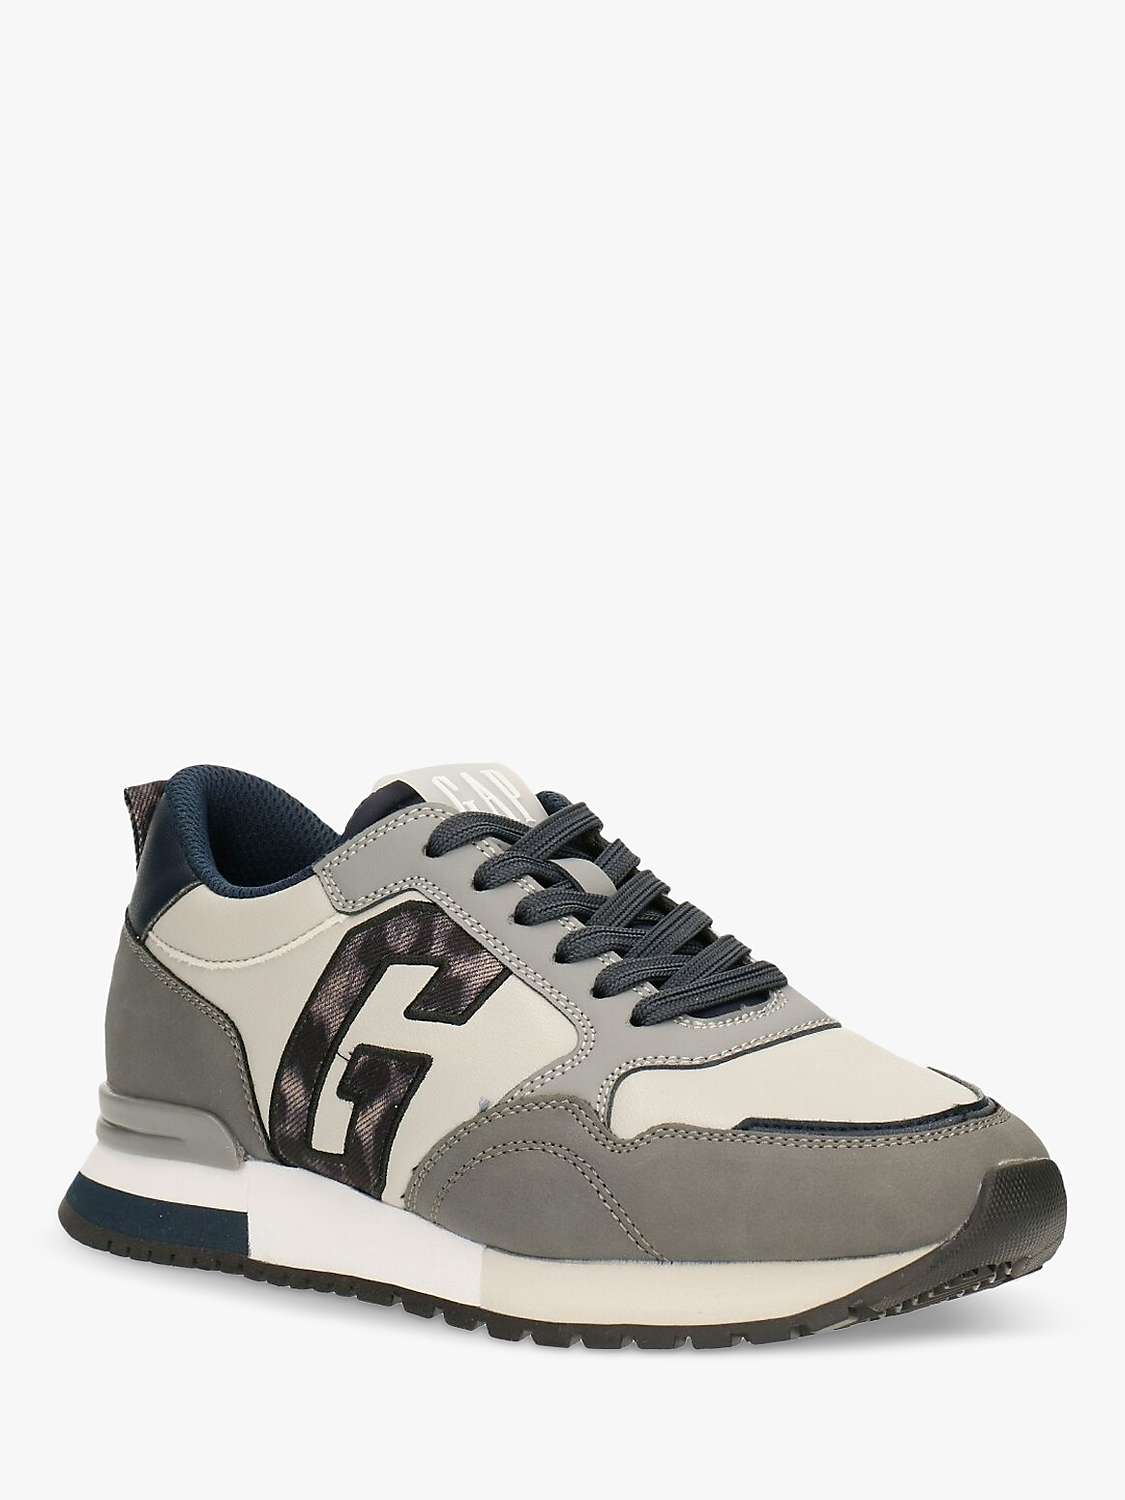 Buy Gap Kids' New York II Lace Up Trainers Online at johnlewis.com